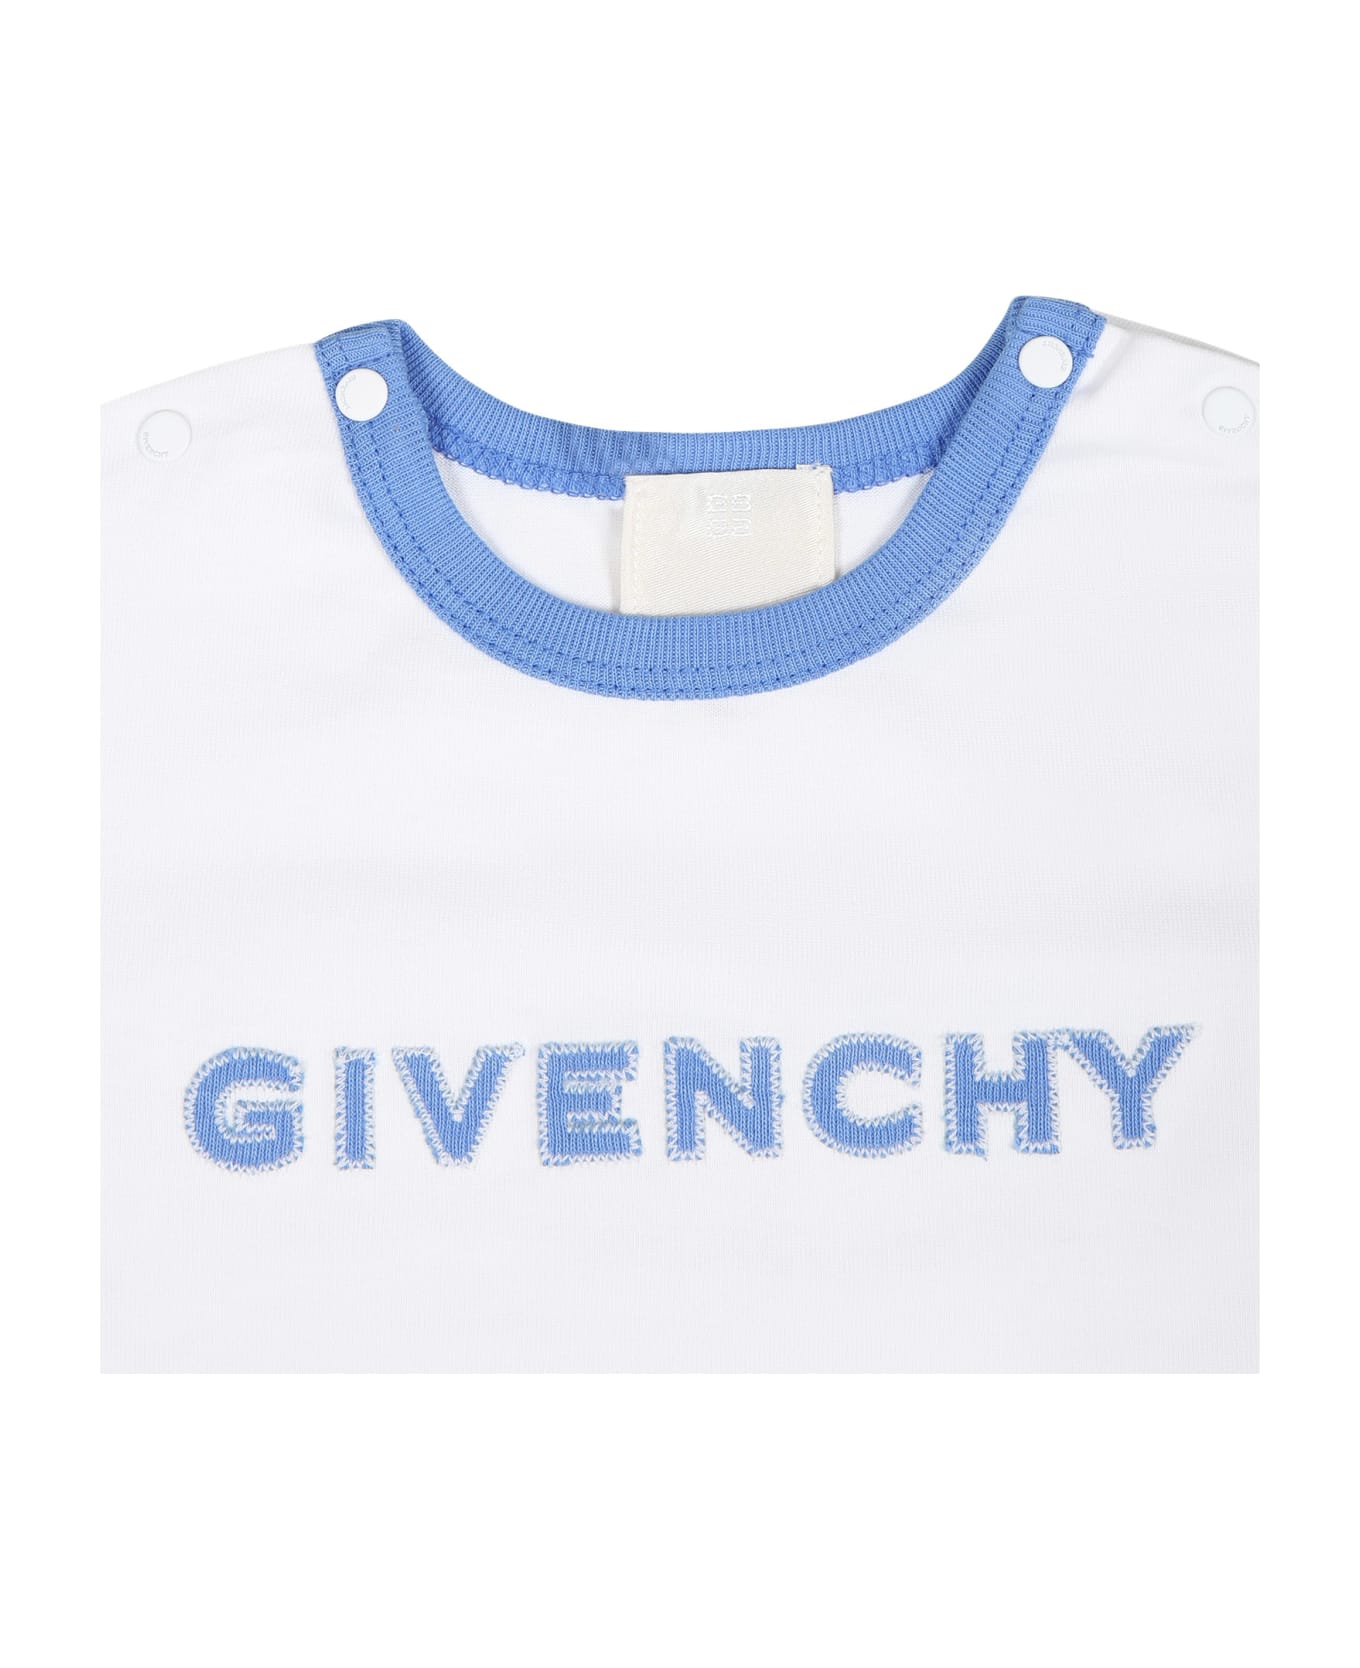 Givenchy Light Blue Baby Set With Logo - Light Blue ボトムス